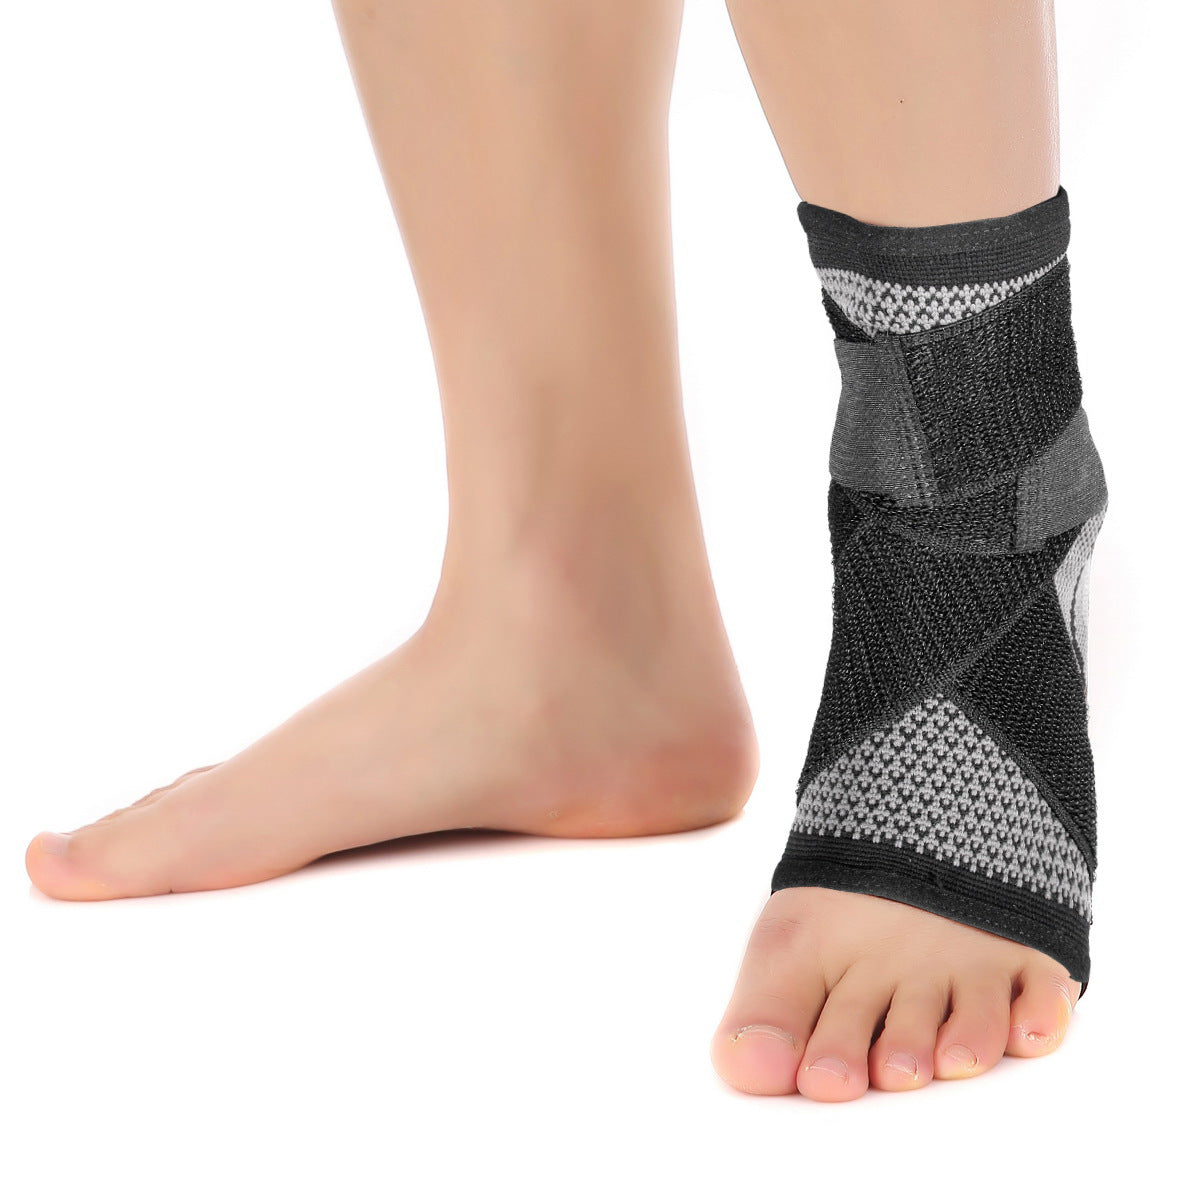 Outdoor sports pressurized ankle support for cycling sports wear-resistant breathable ankle support sports protective gear